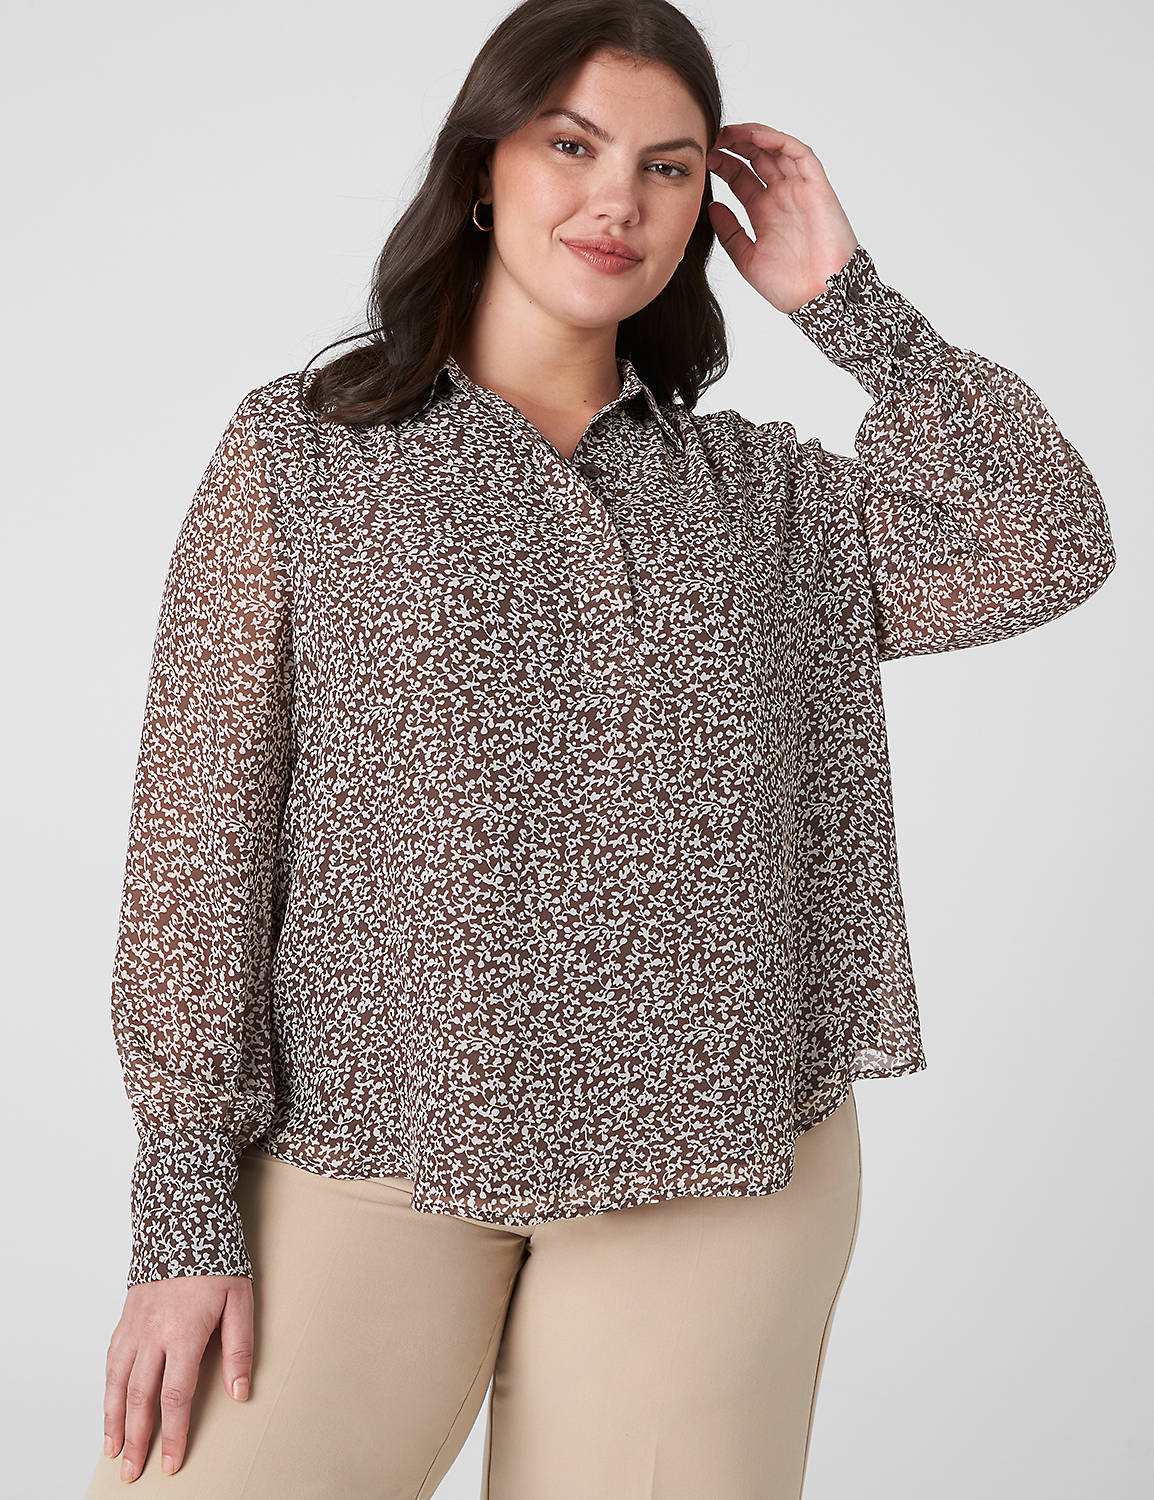 Classic Long Sleeve Collared Placke Product Image 1